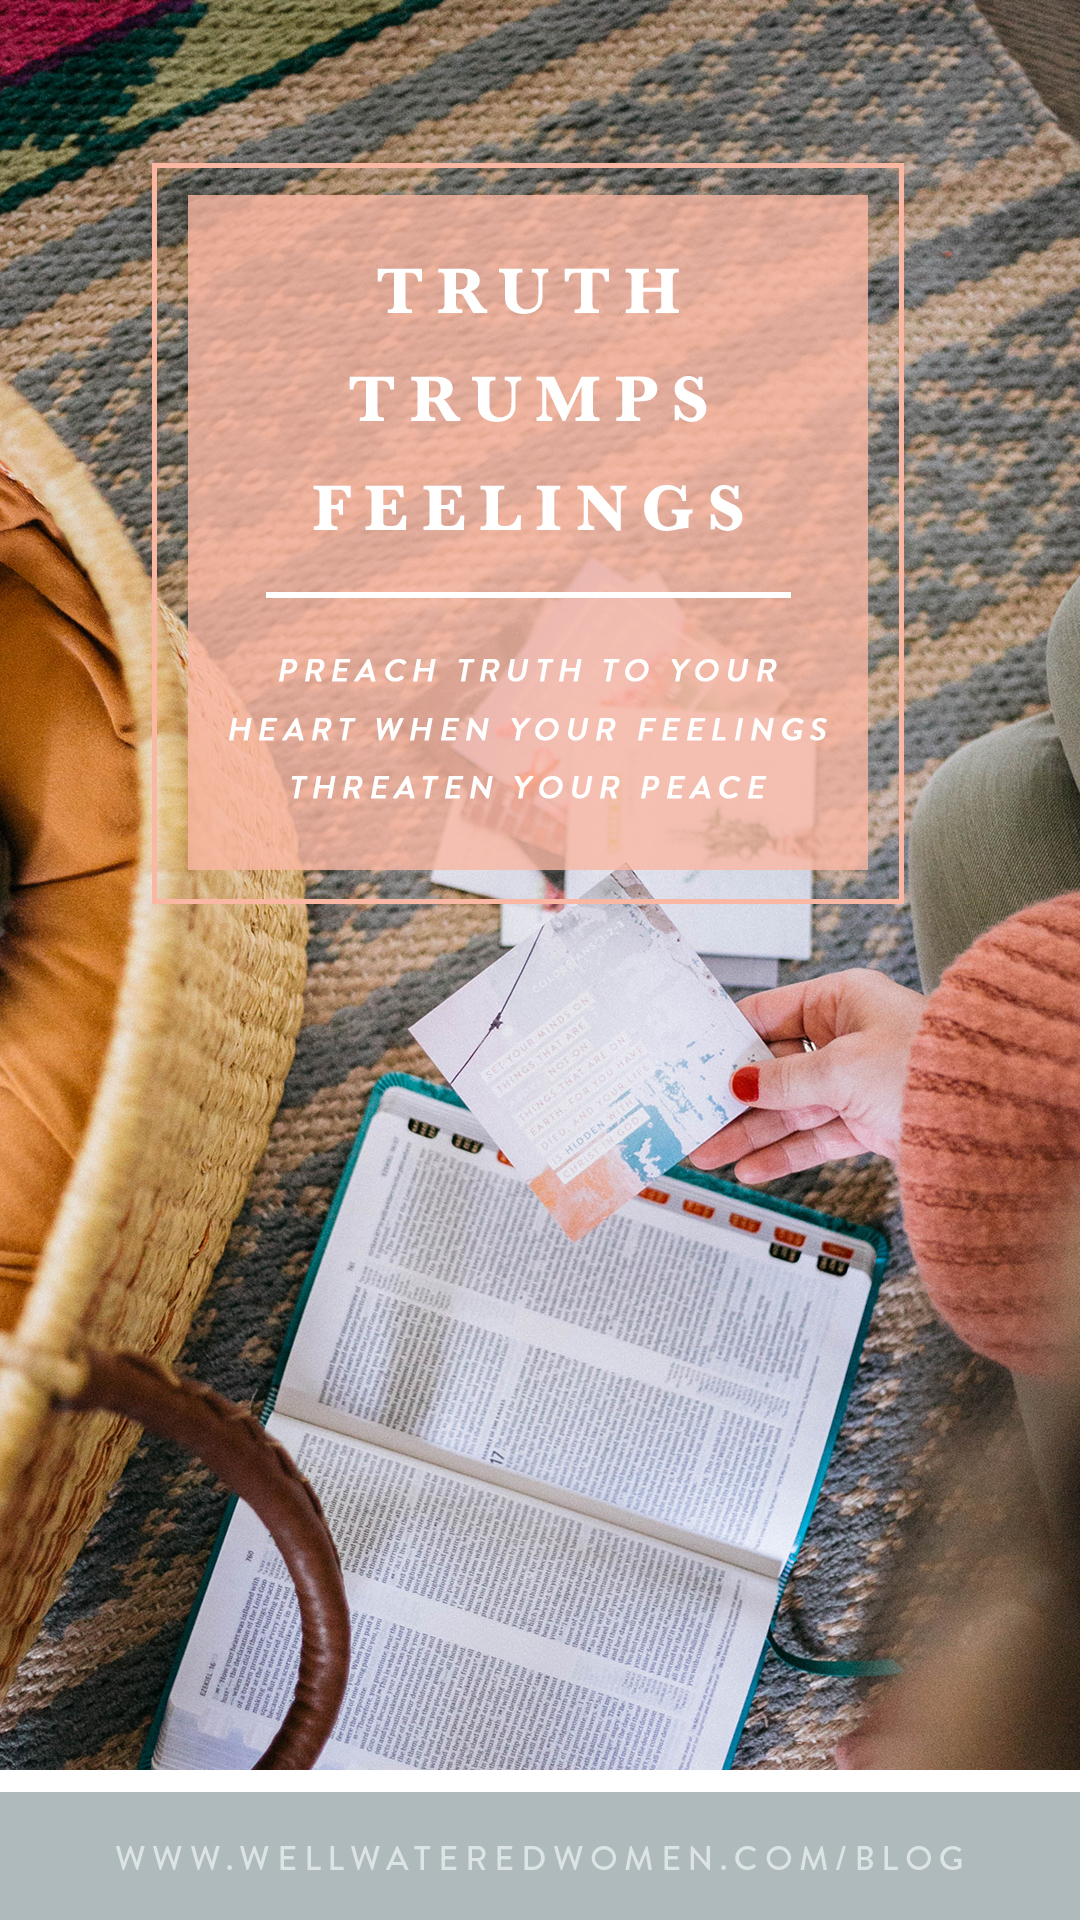 Truth Trumps Feelings: Preach truth to your heart when your feelings threaten your peace.